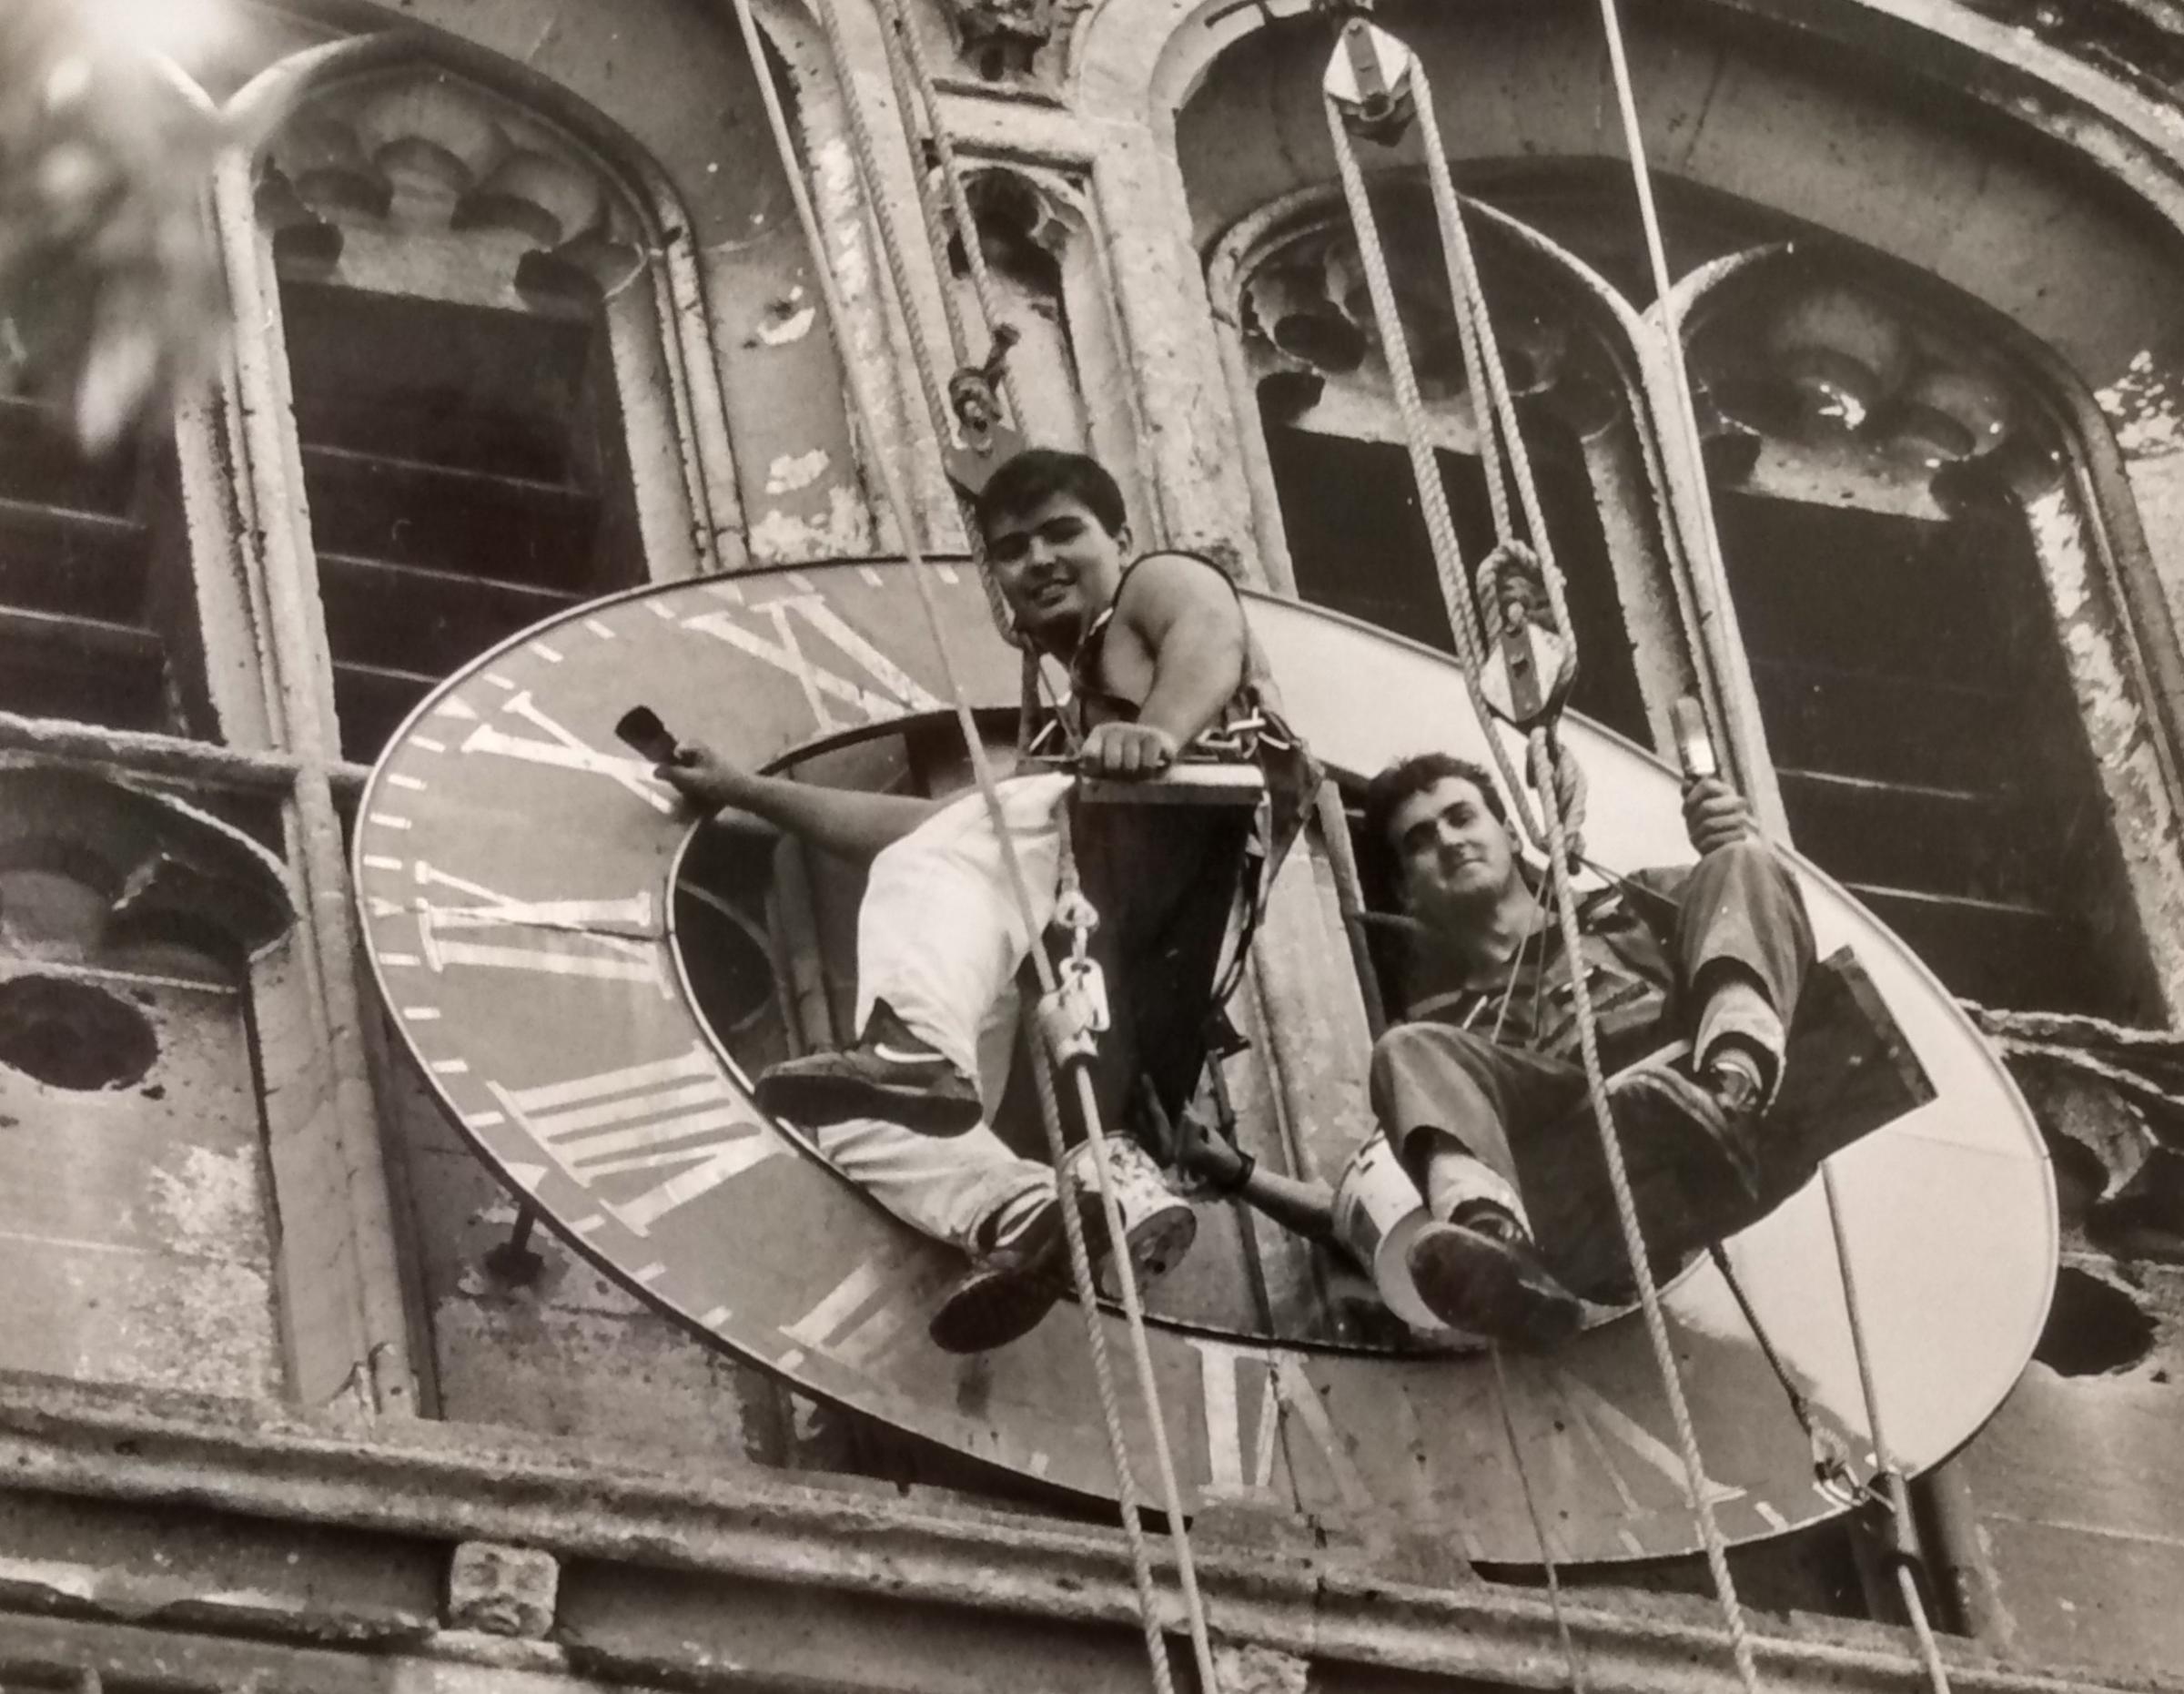 It’s August 1991 and restorers Chaz Morgan and George Edge called time on the Evesham Bell Tower clock while they carried out repairs